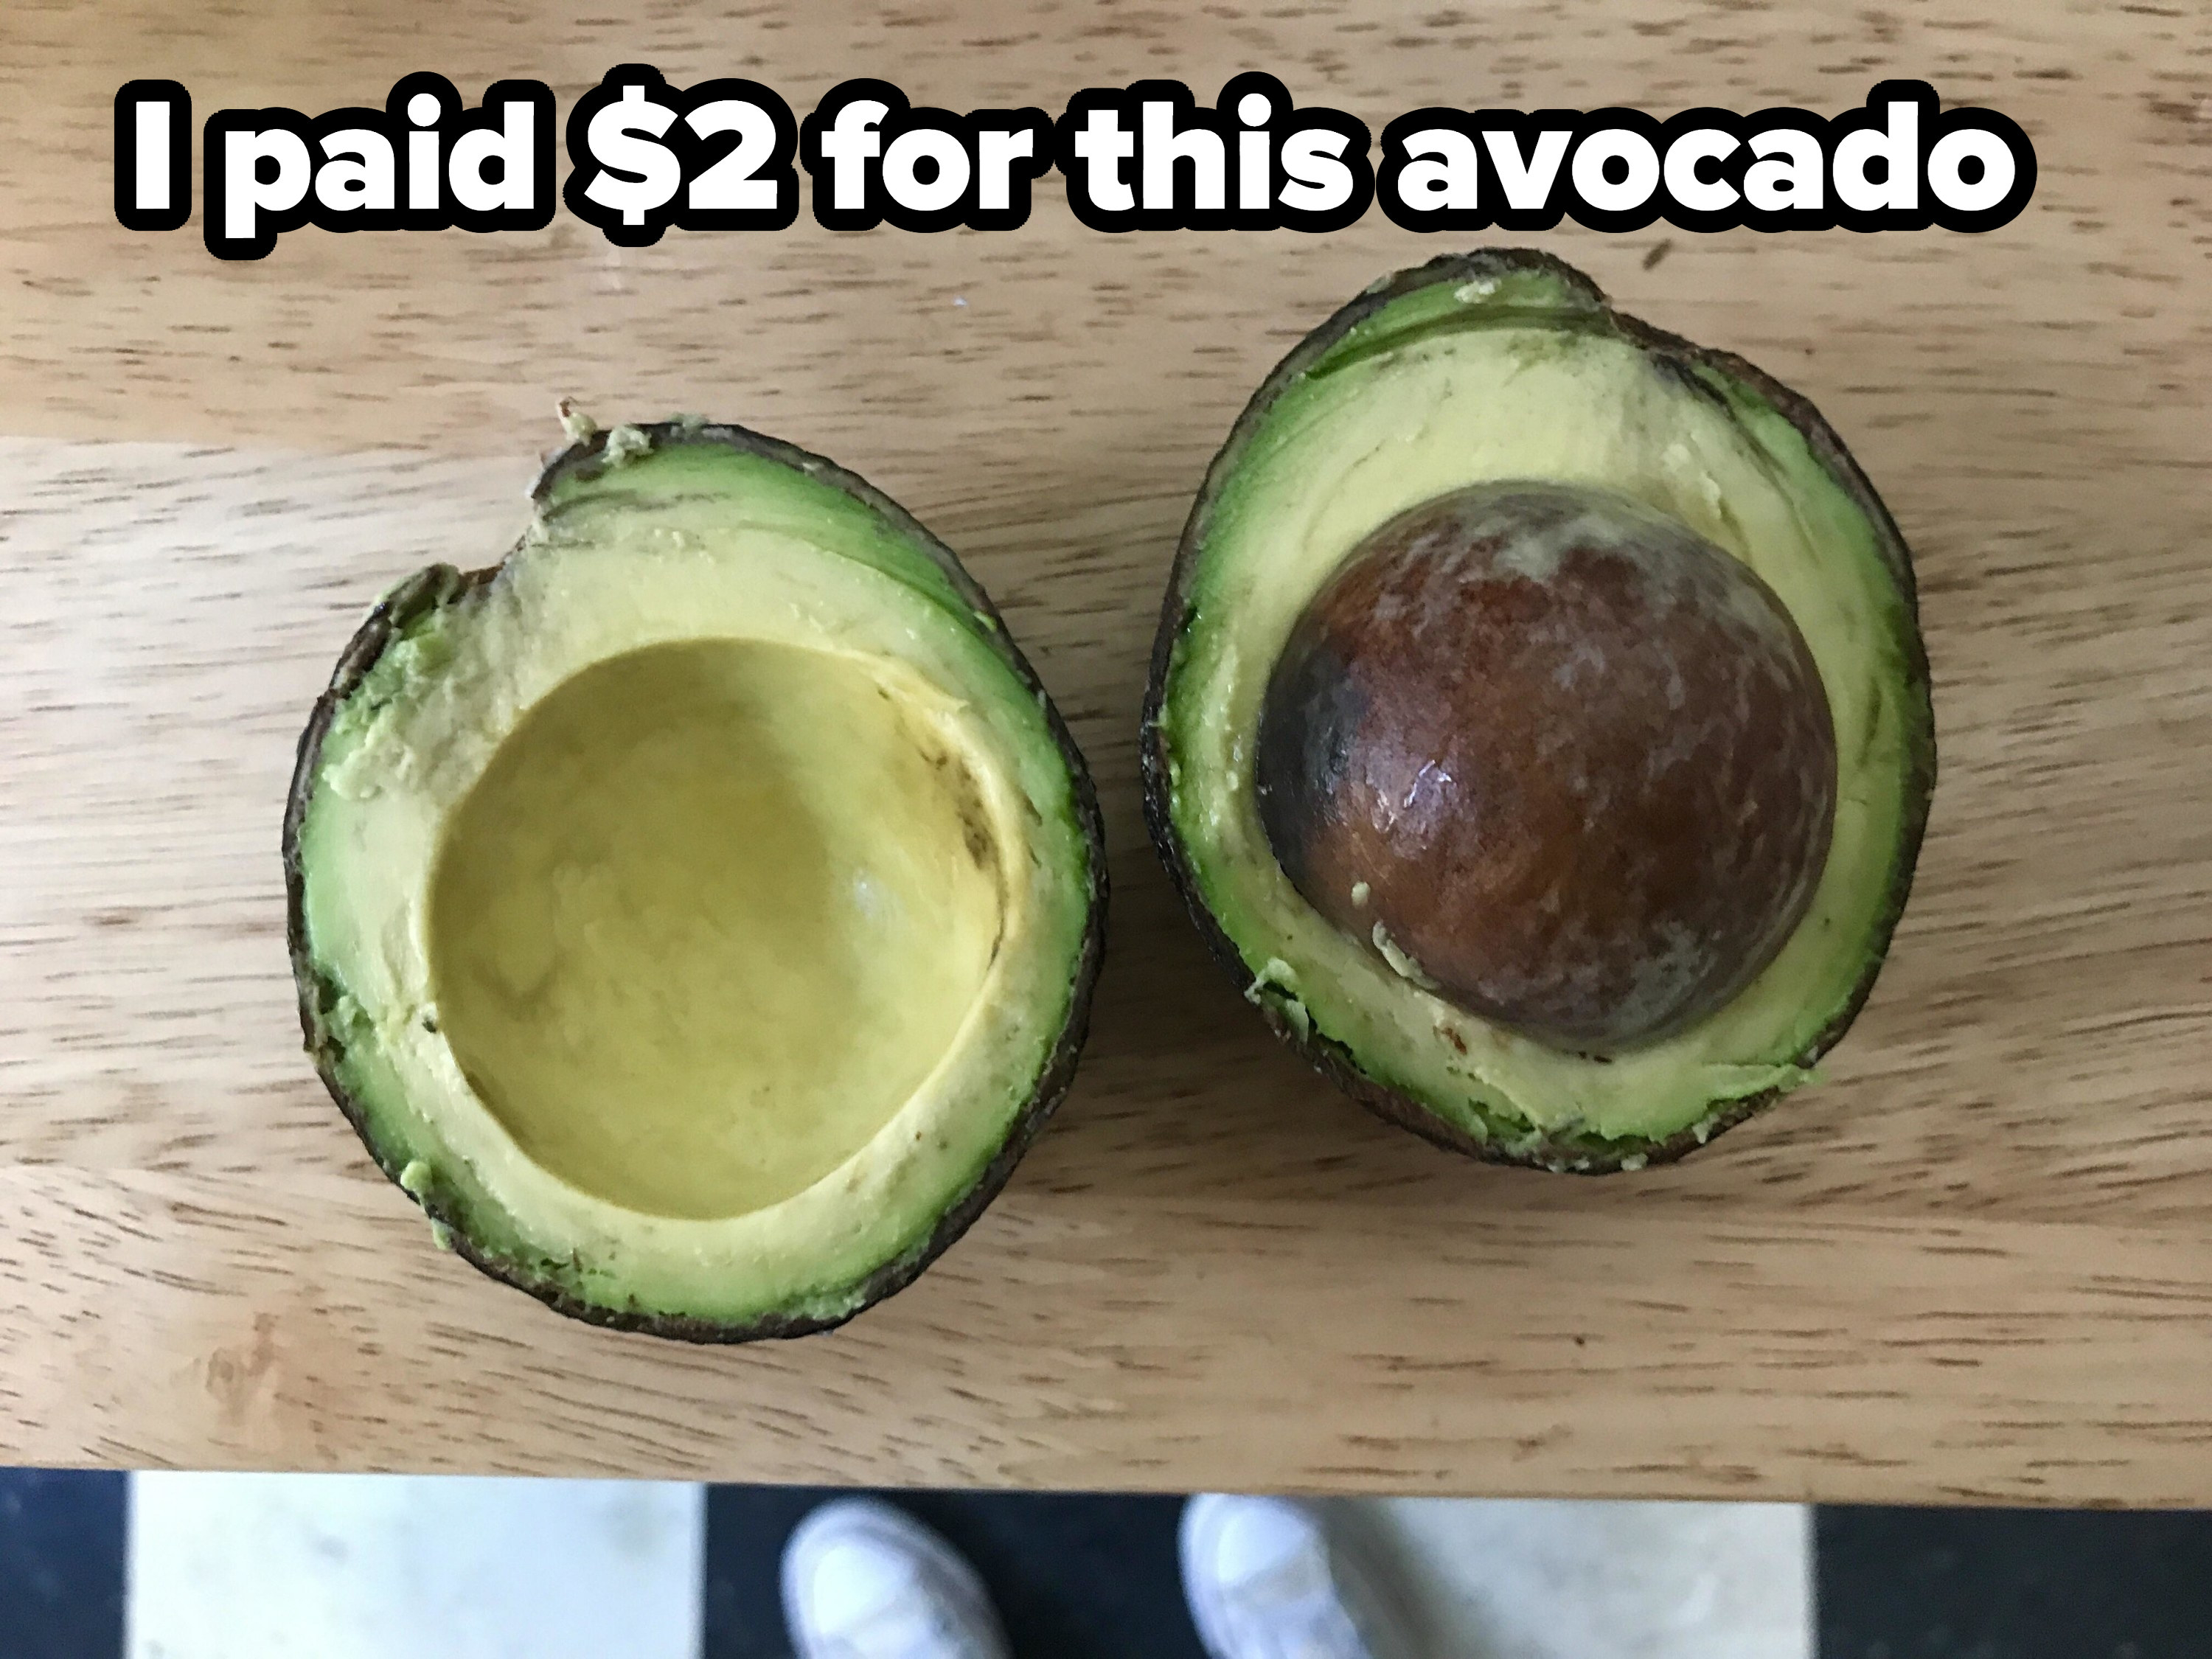 an avocado with a giant pit